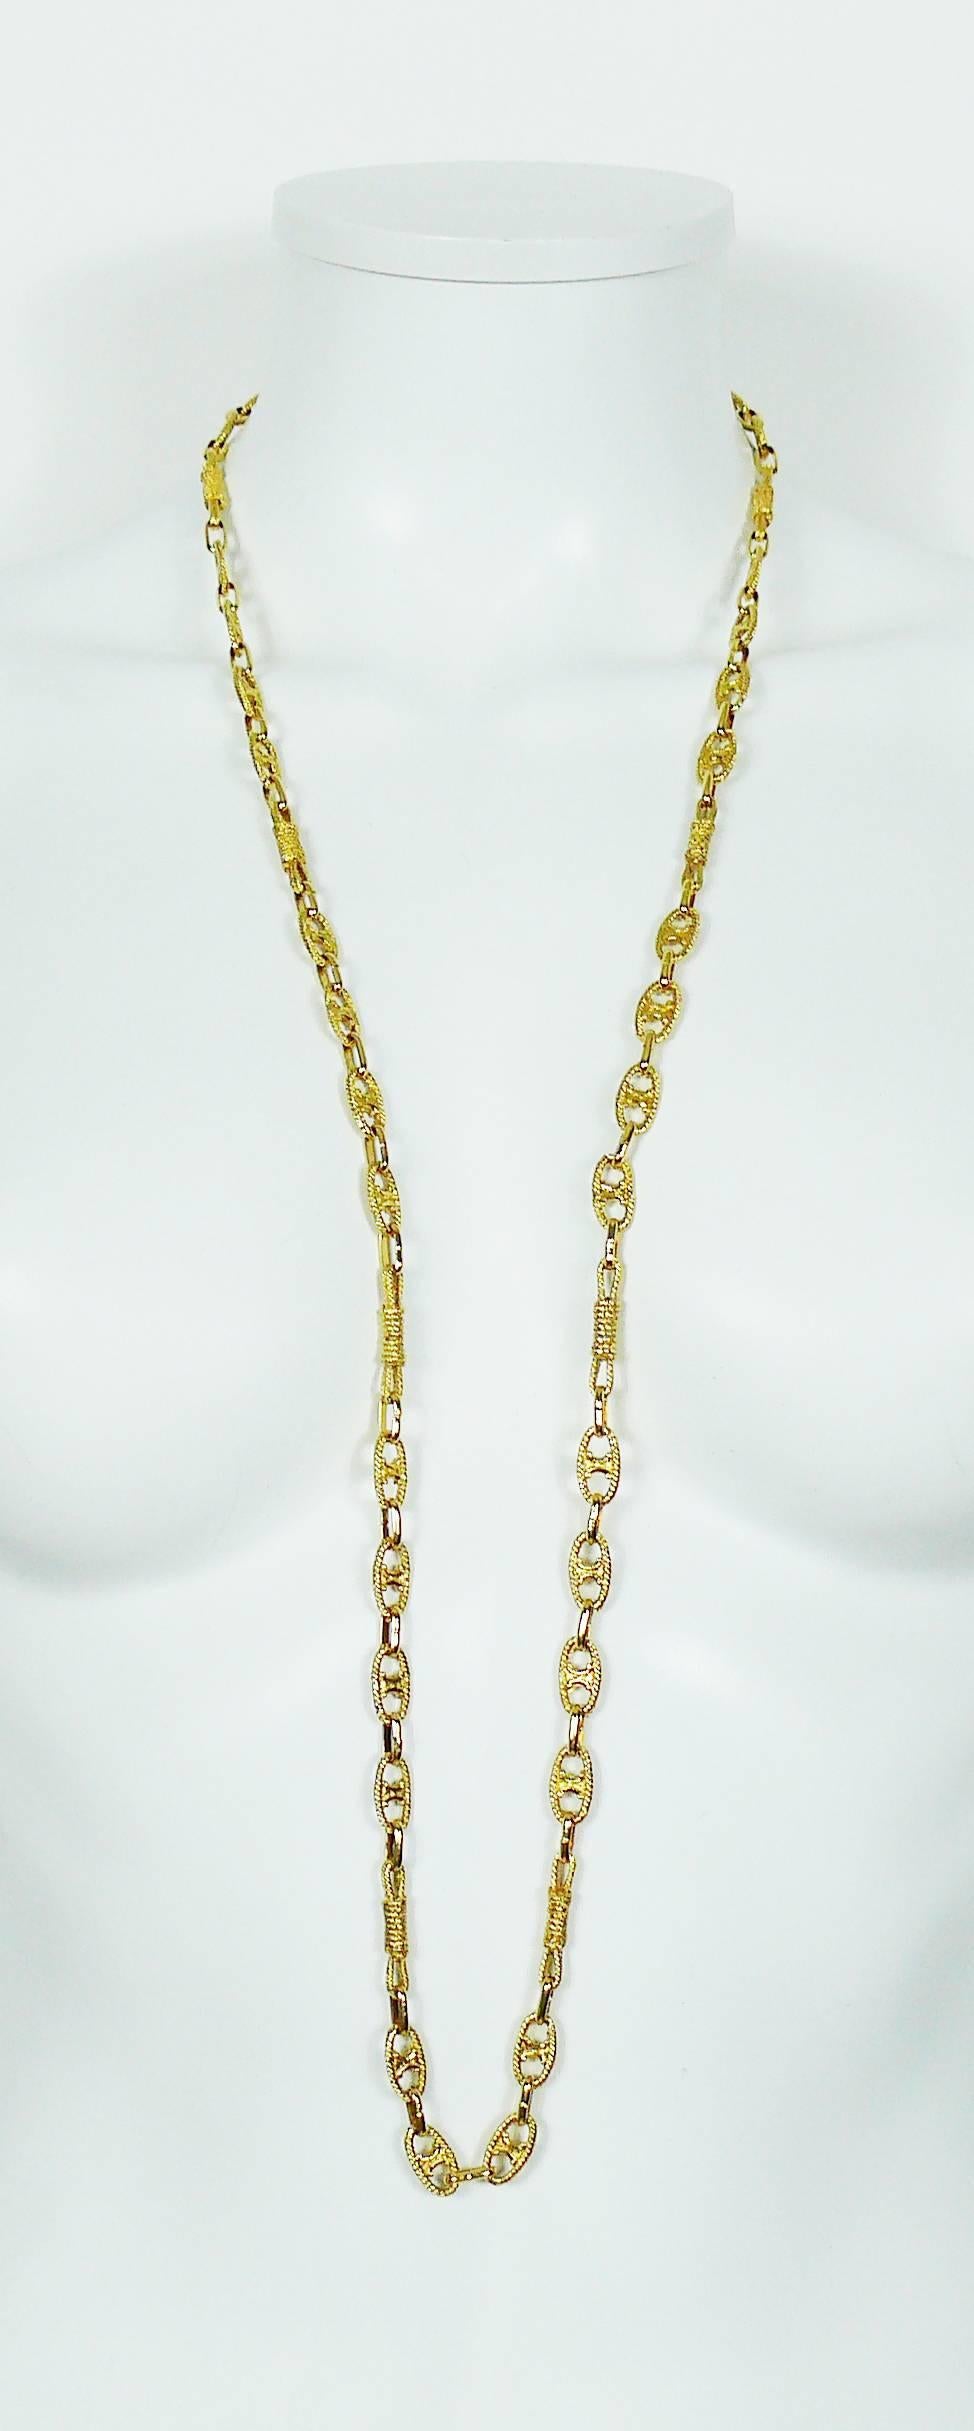 CELINE vintage gold toned sautoir necklace featuring iconic CELINE monogram links alterning with rope knot design links.

Slips on (no clasp).

Unmarked.

Indicative measurements : total length approx. 94 cm (37 inches).

JEWELRY CONDITION CHART
-